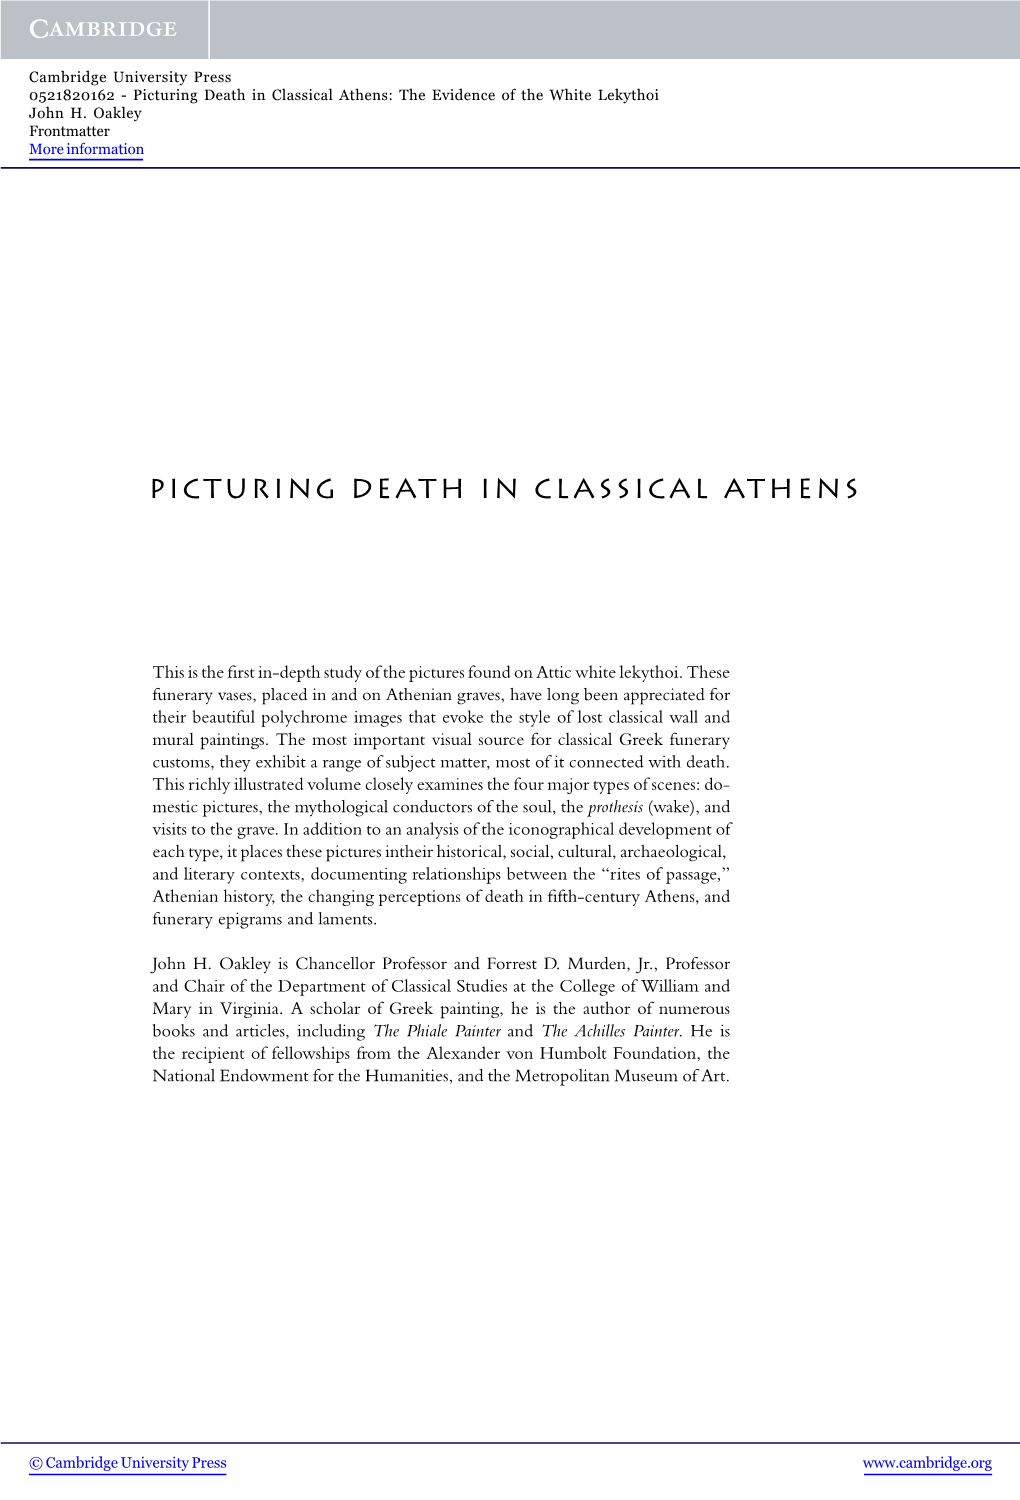 Picturing Death in Classical Athens: the Evidence of the White Lekythoi John H